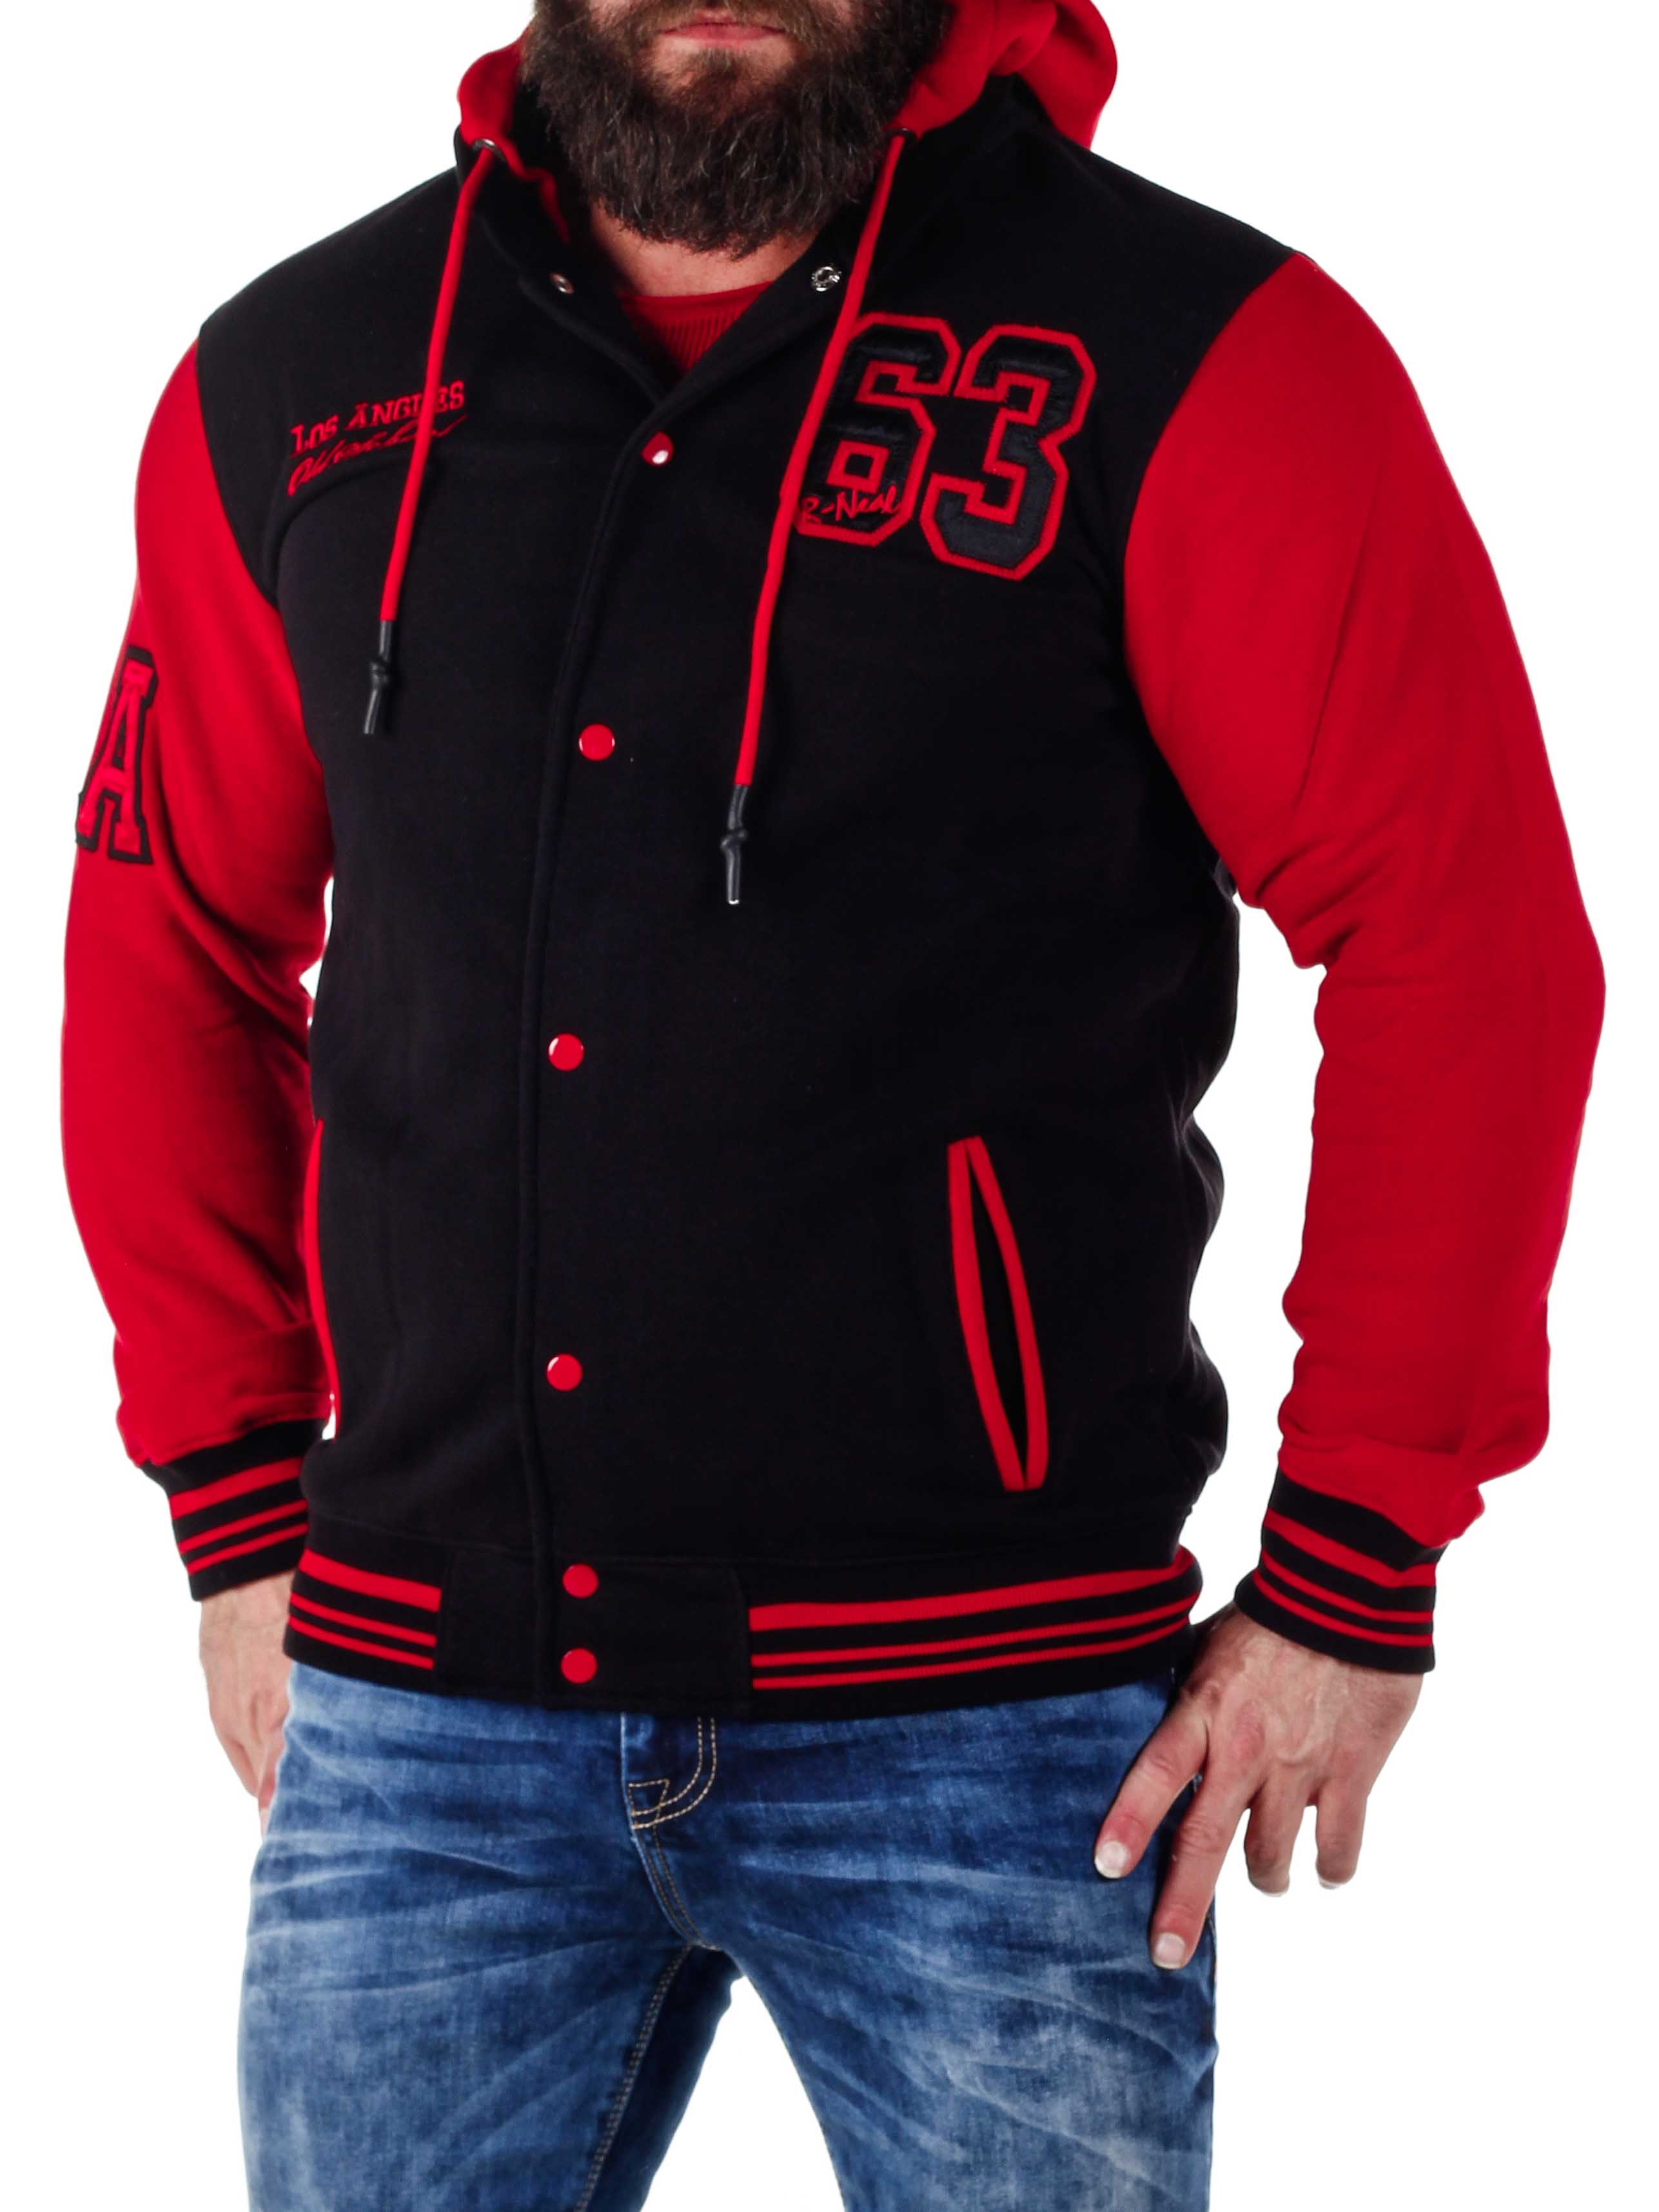 D-R6876-1-black-red (5 of 12)